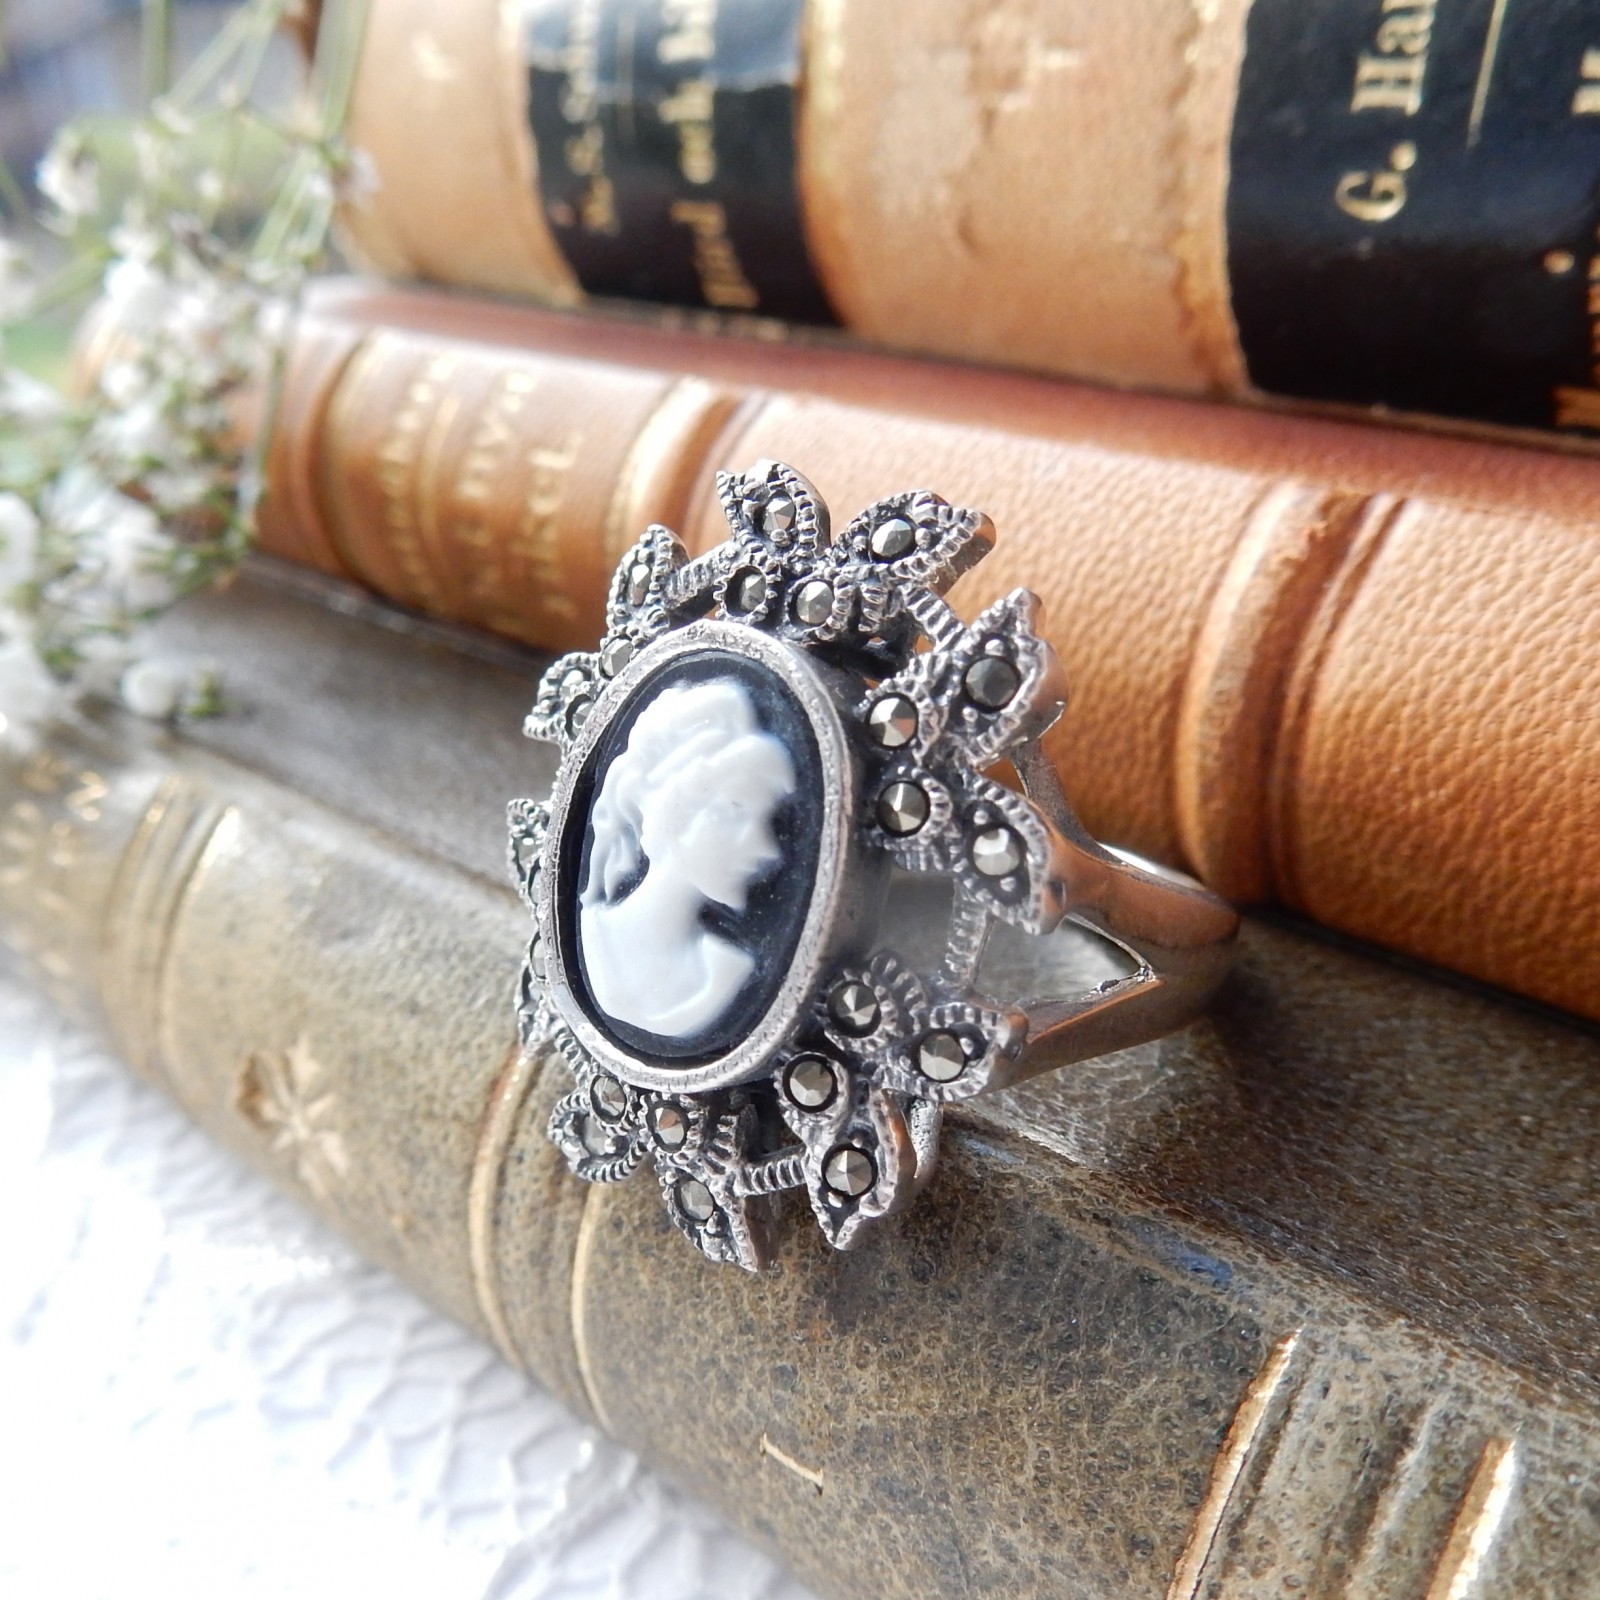 Antique Shell Cameo Ring Silver Jewelry Buy Online | Jovon Venice